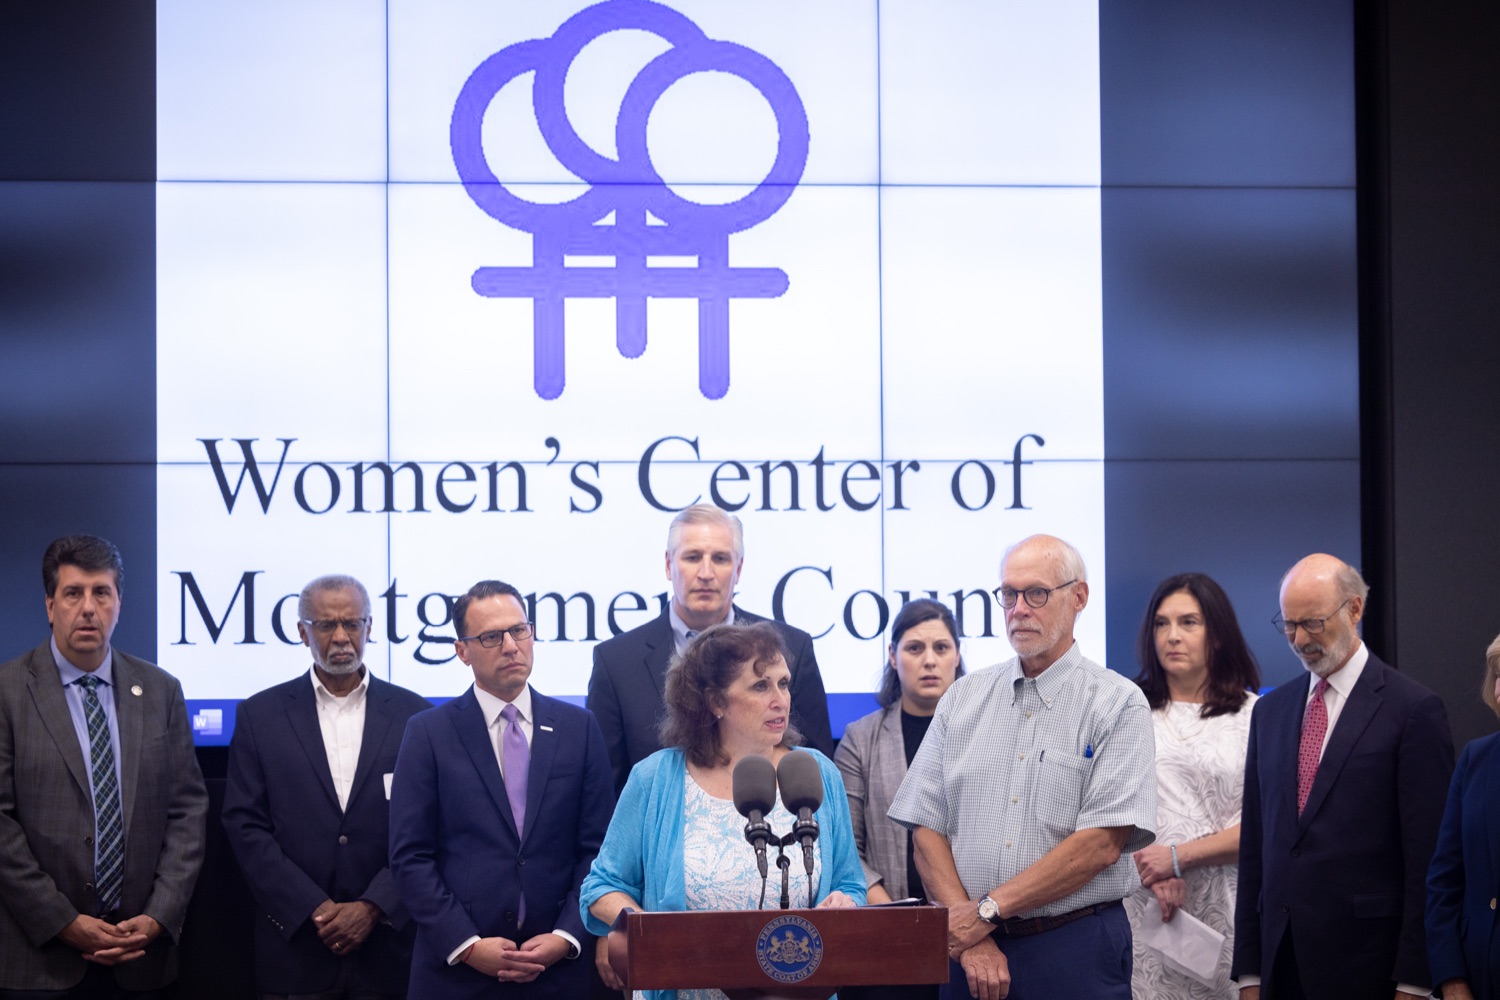   Maria Macaluso, Executive Director, Womens Center of Montgomery County speaks to the press.  Governor Tom Wolf discussed the devastating effects of abortion bans for victims of domestic violence and the recently signed executive order allowing out-of-state residents to seek reproductive health care services in Pennsylvania without fear of prosecution.  JULY 29, 2022 - COLMAR, PA<br><a href="https://filesource.amperwave.net/commonwealthofpa/photo/22054_gov_choice_dz_015.JPG" target="_blank">⇣ Download Photo</a>